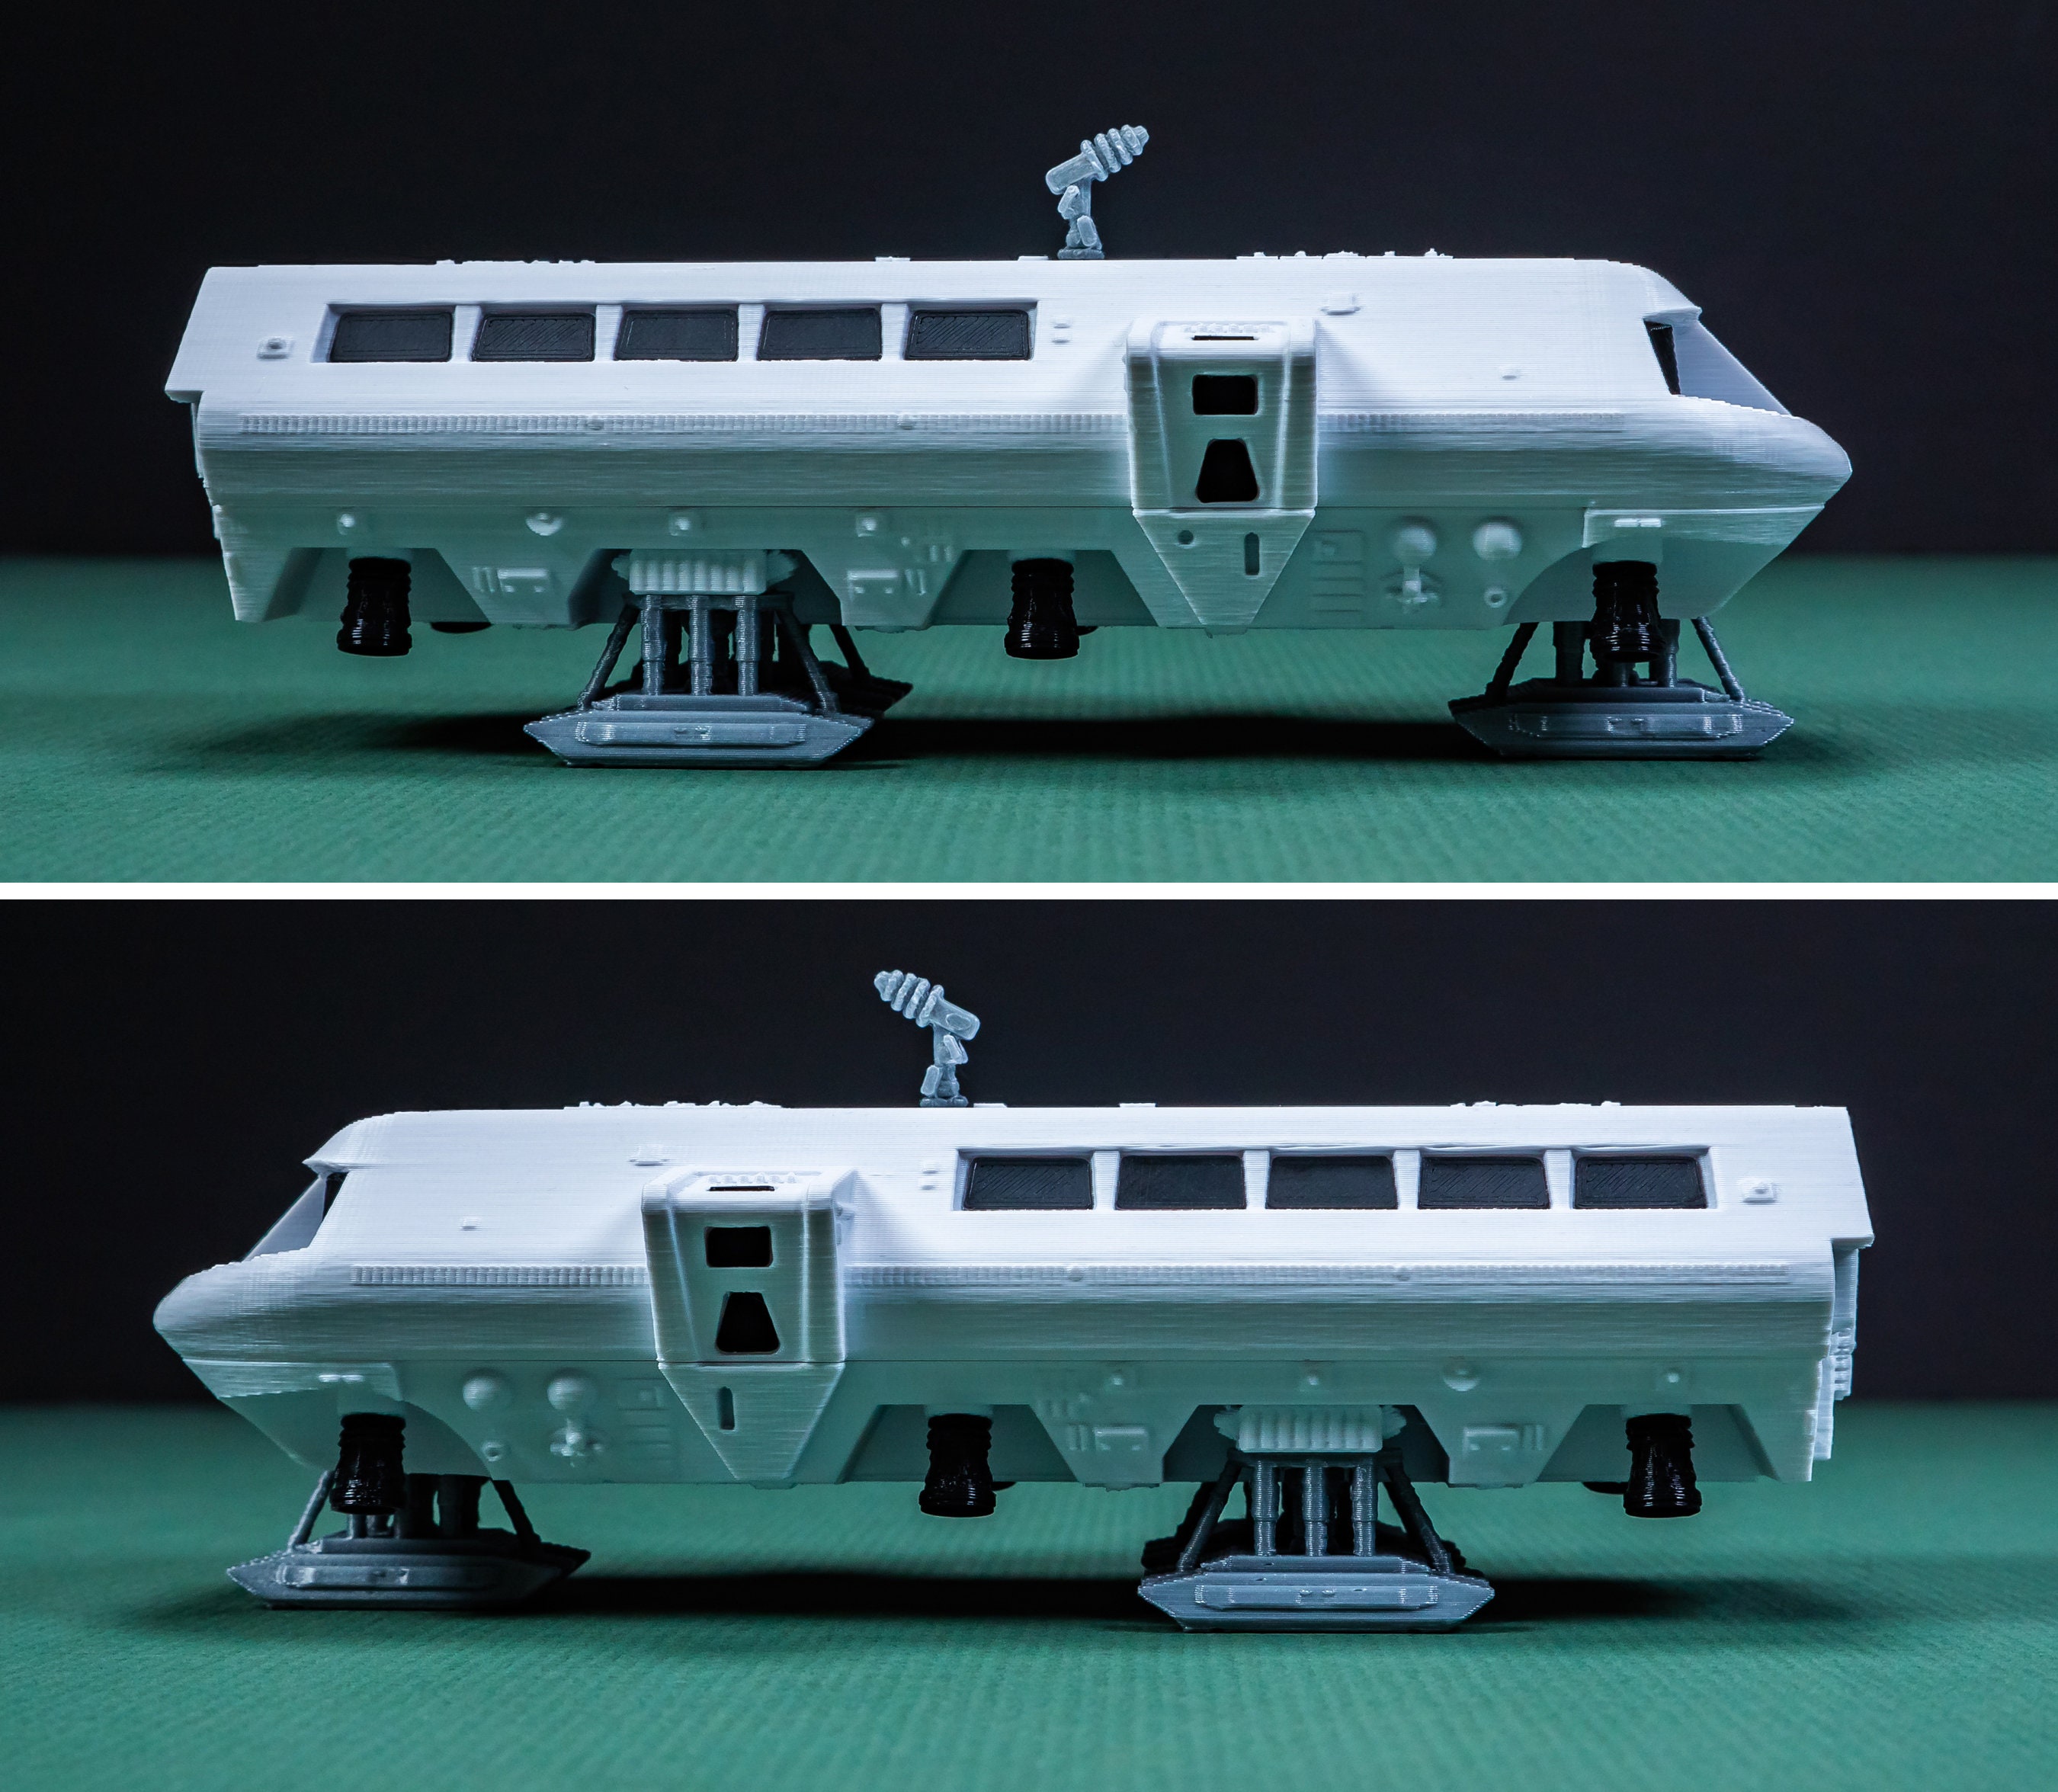 MOON BUS Lunar Transport Vehicle 2001 a Space Odyssey Plastic 